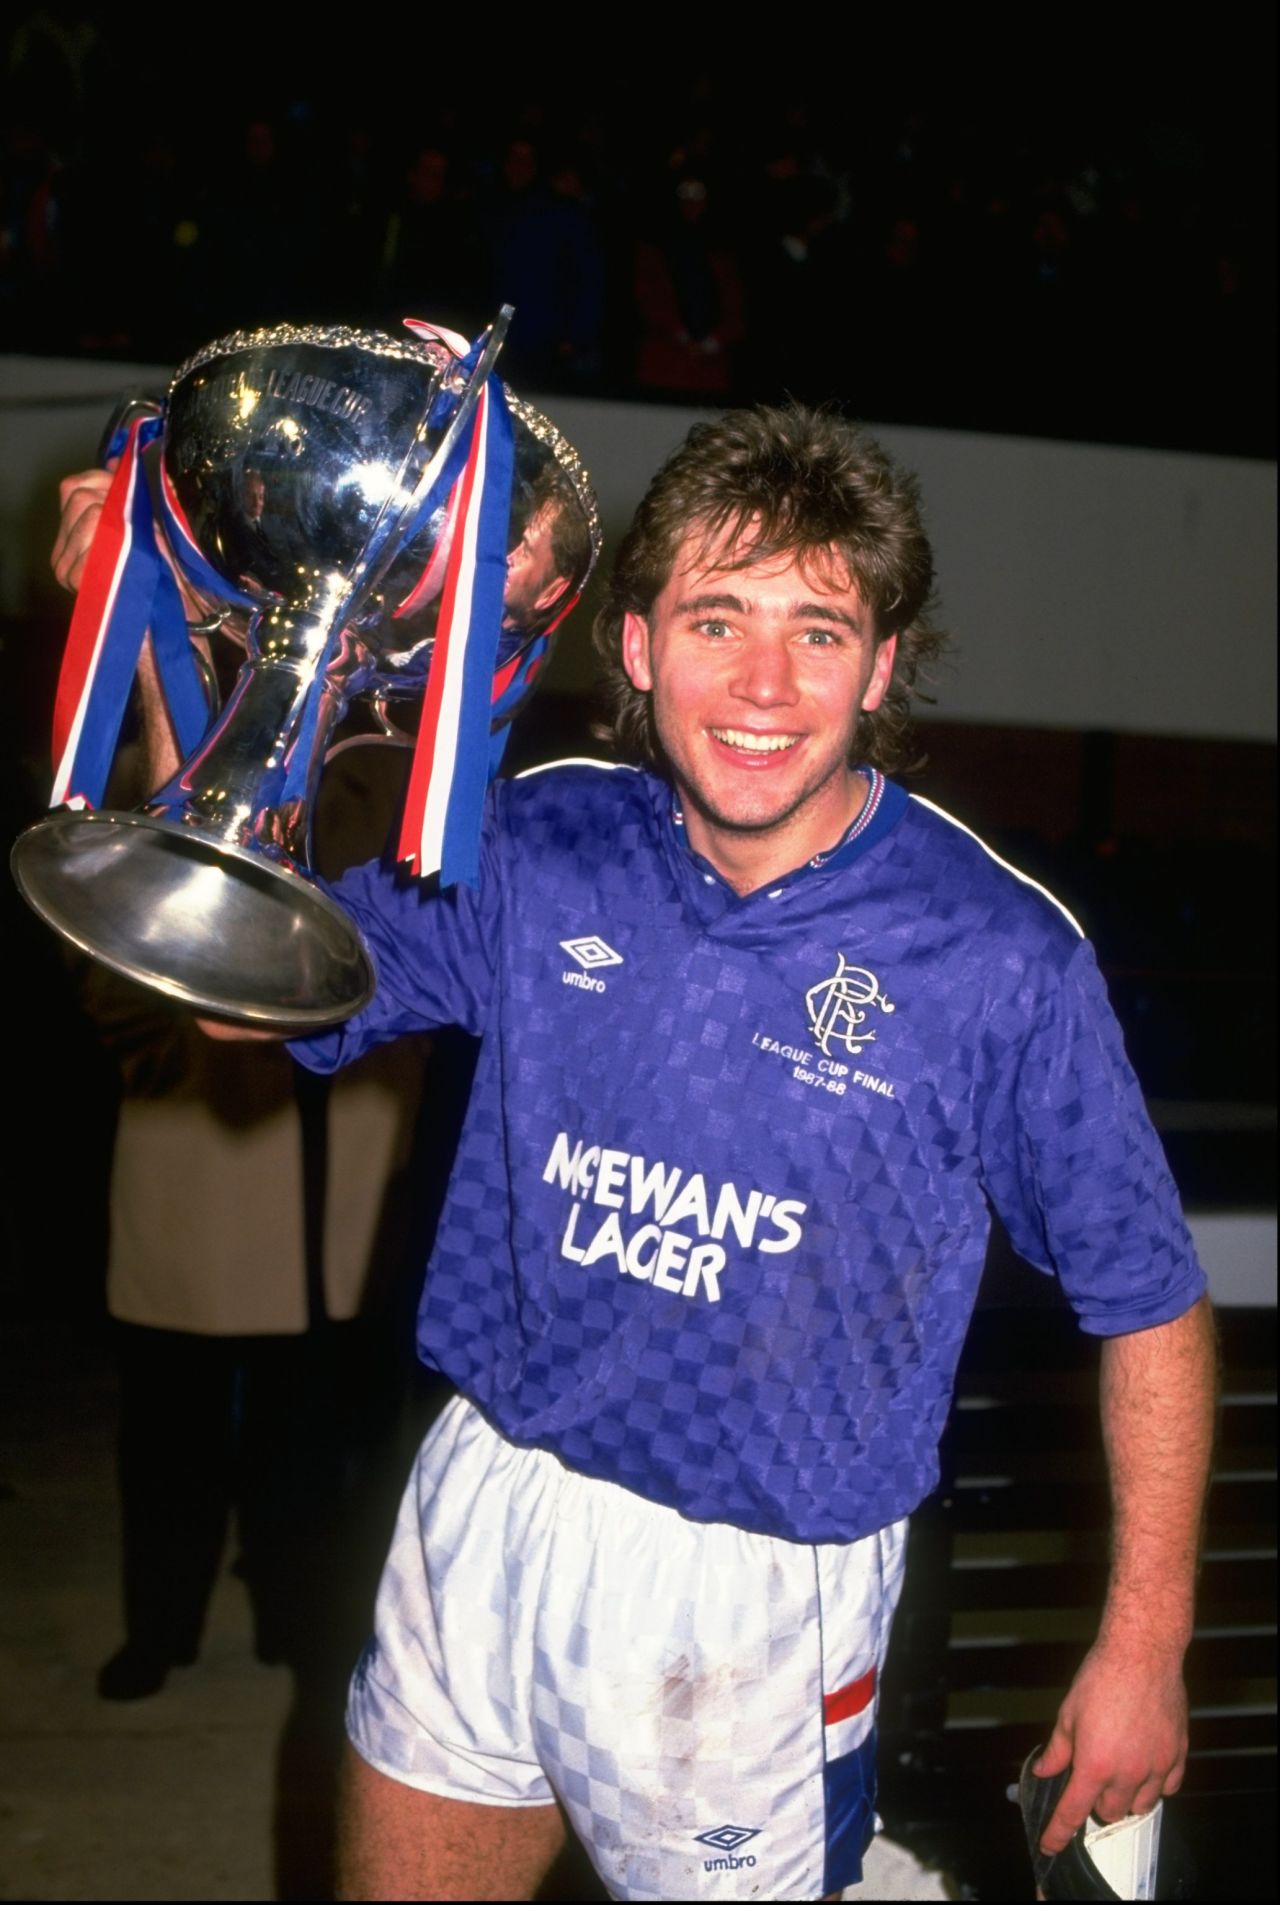 McCoist is a club legend, having spent 15 years at Rangers as a player. He won 10 league titles, one Scottish Cup and nine Scottish League Cup crowns. He scored 250 goals for the club and twice won the European Golden Boot. He is enduring a turbulent first season as coach.